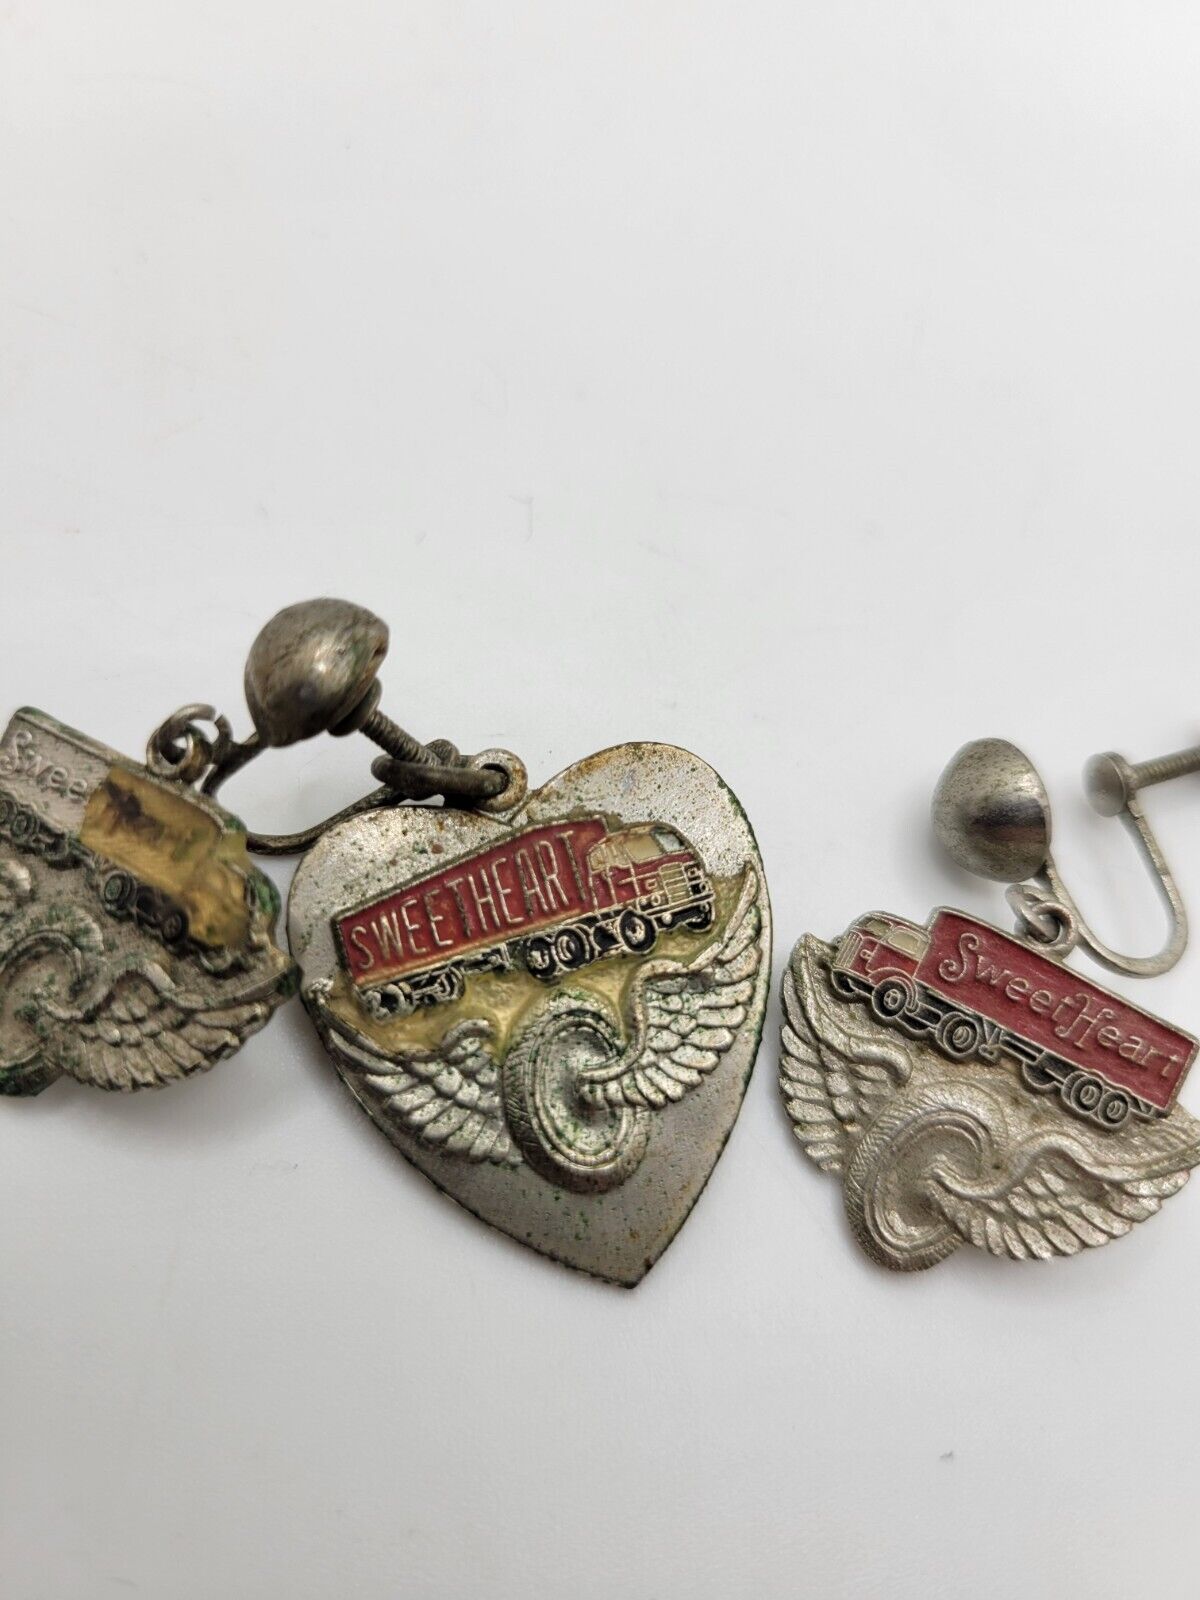 Vintage Sweeheart Trucking Collector Pins Lot Of 3